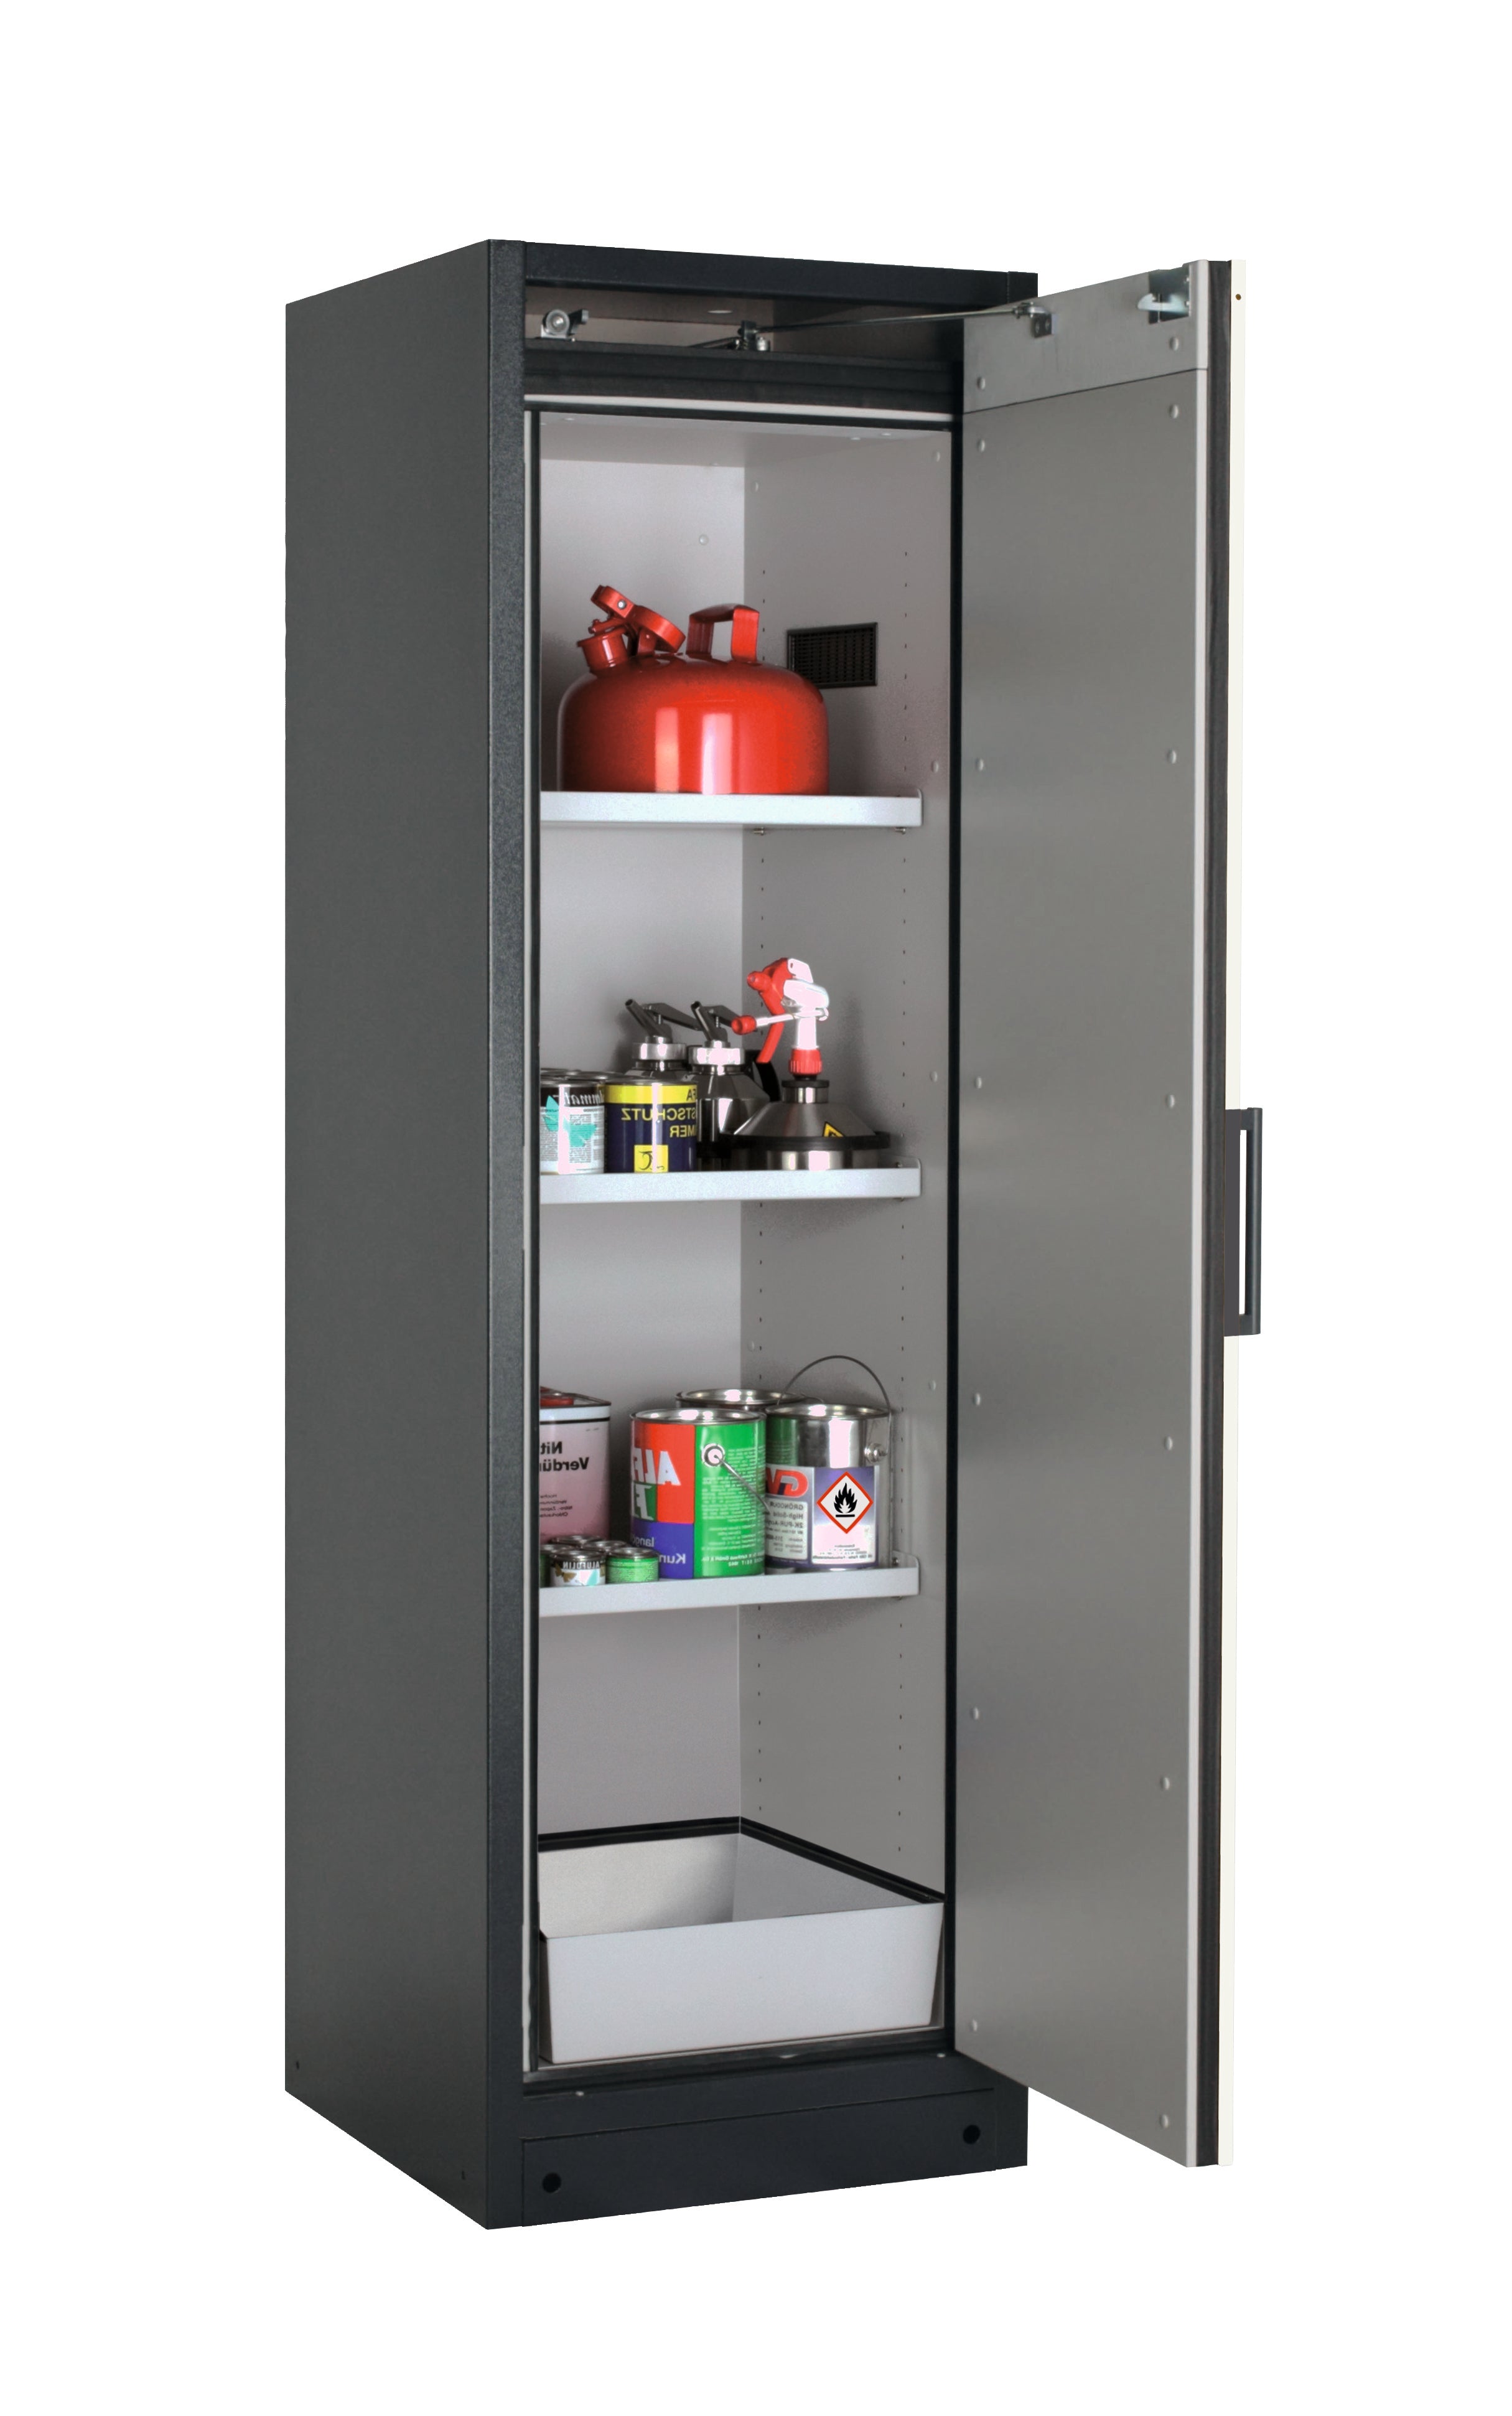 Type 90 safety storage cabinet Q-CLASSIC-90 model Q90.195.060.R in asecos silver with 3x shelf standard (sheet steel),